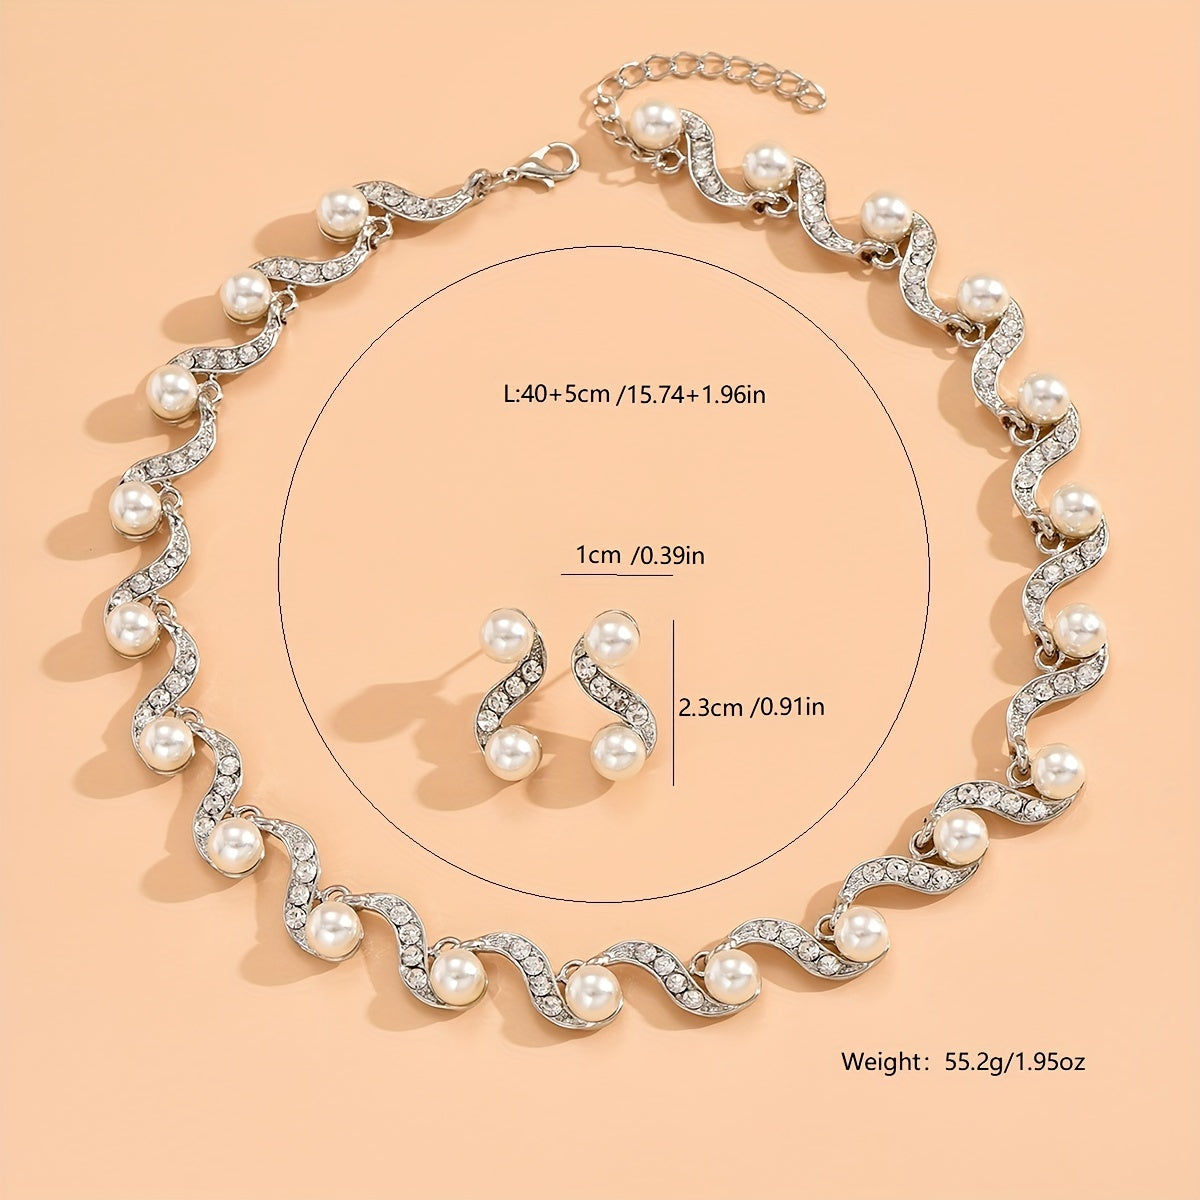 Make a Statement on Your Big Day with this Bridal Jewelry Set - Wave Shape Choker Necklace and Drop Earrings with Inlaid Faux Pearls, Perfect for Prom Party